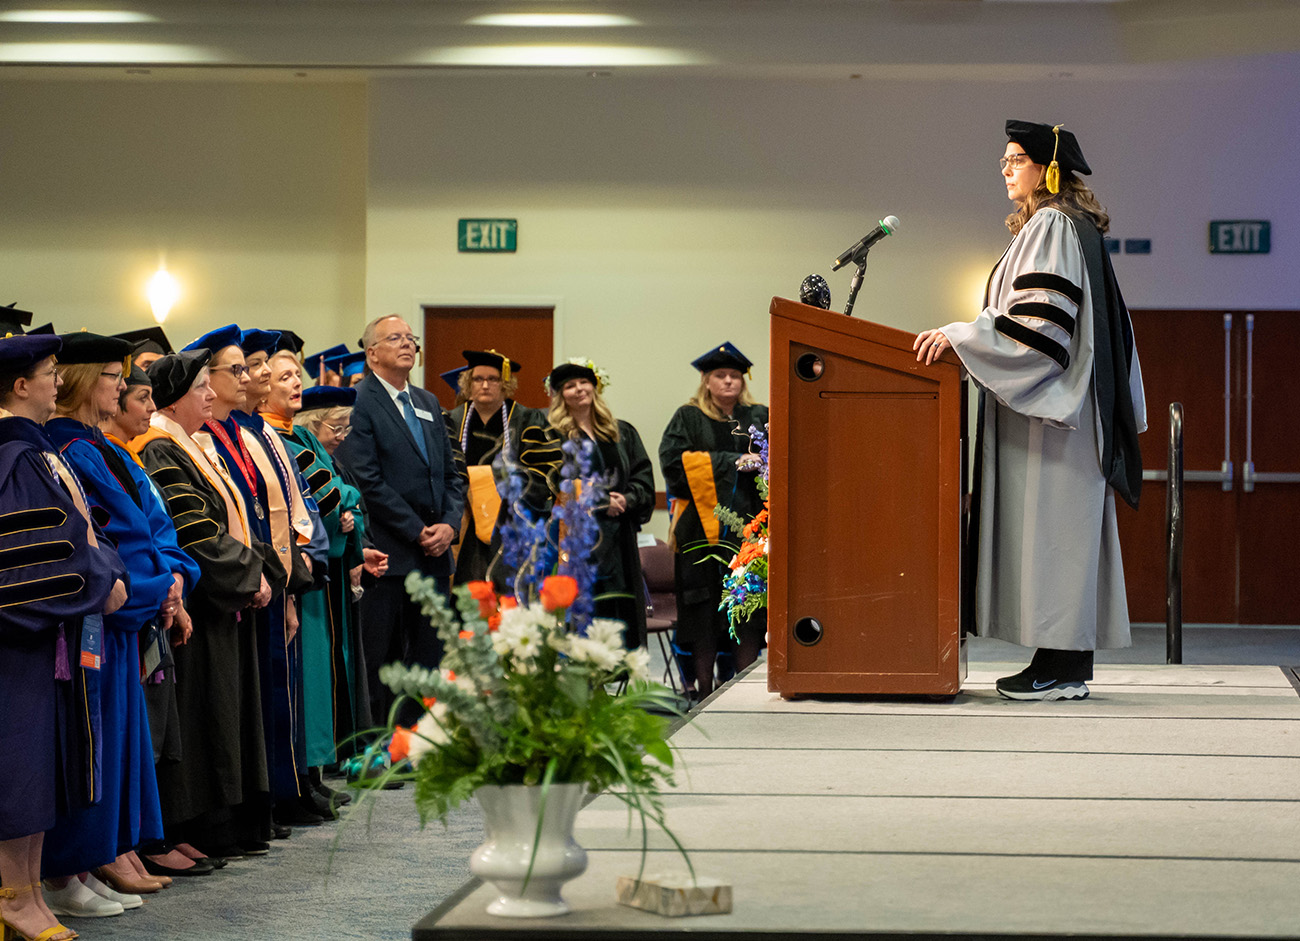 Poole stands at a podium in her doctoral regalia and addresses the faculty in their regalia standing in front of her.